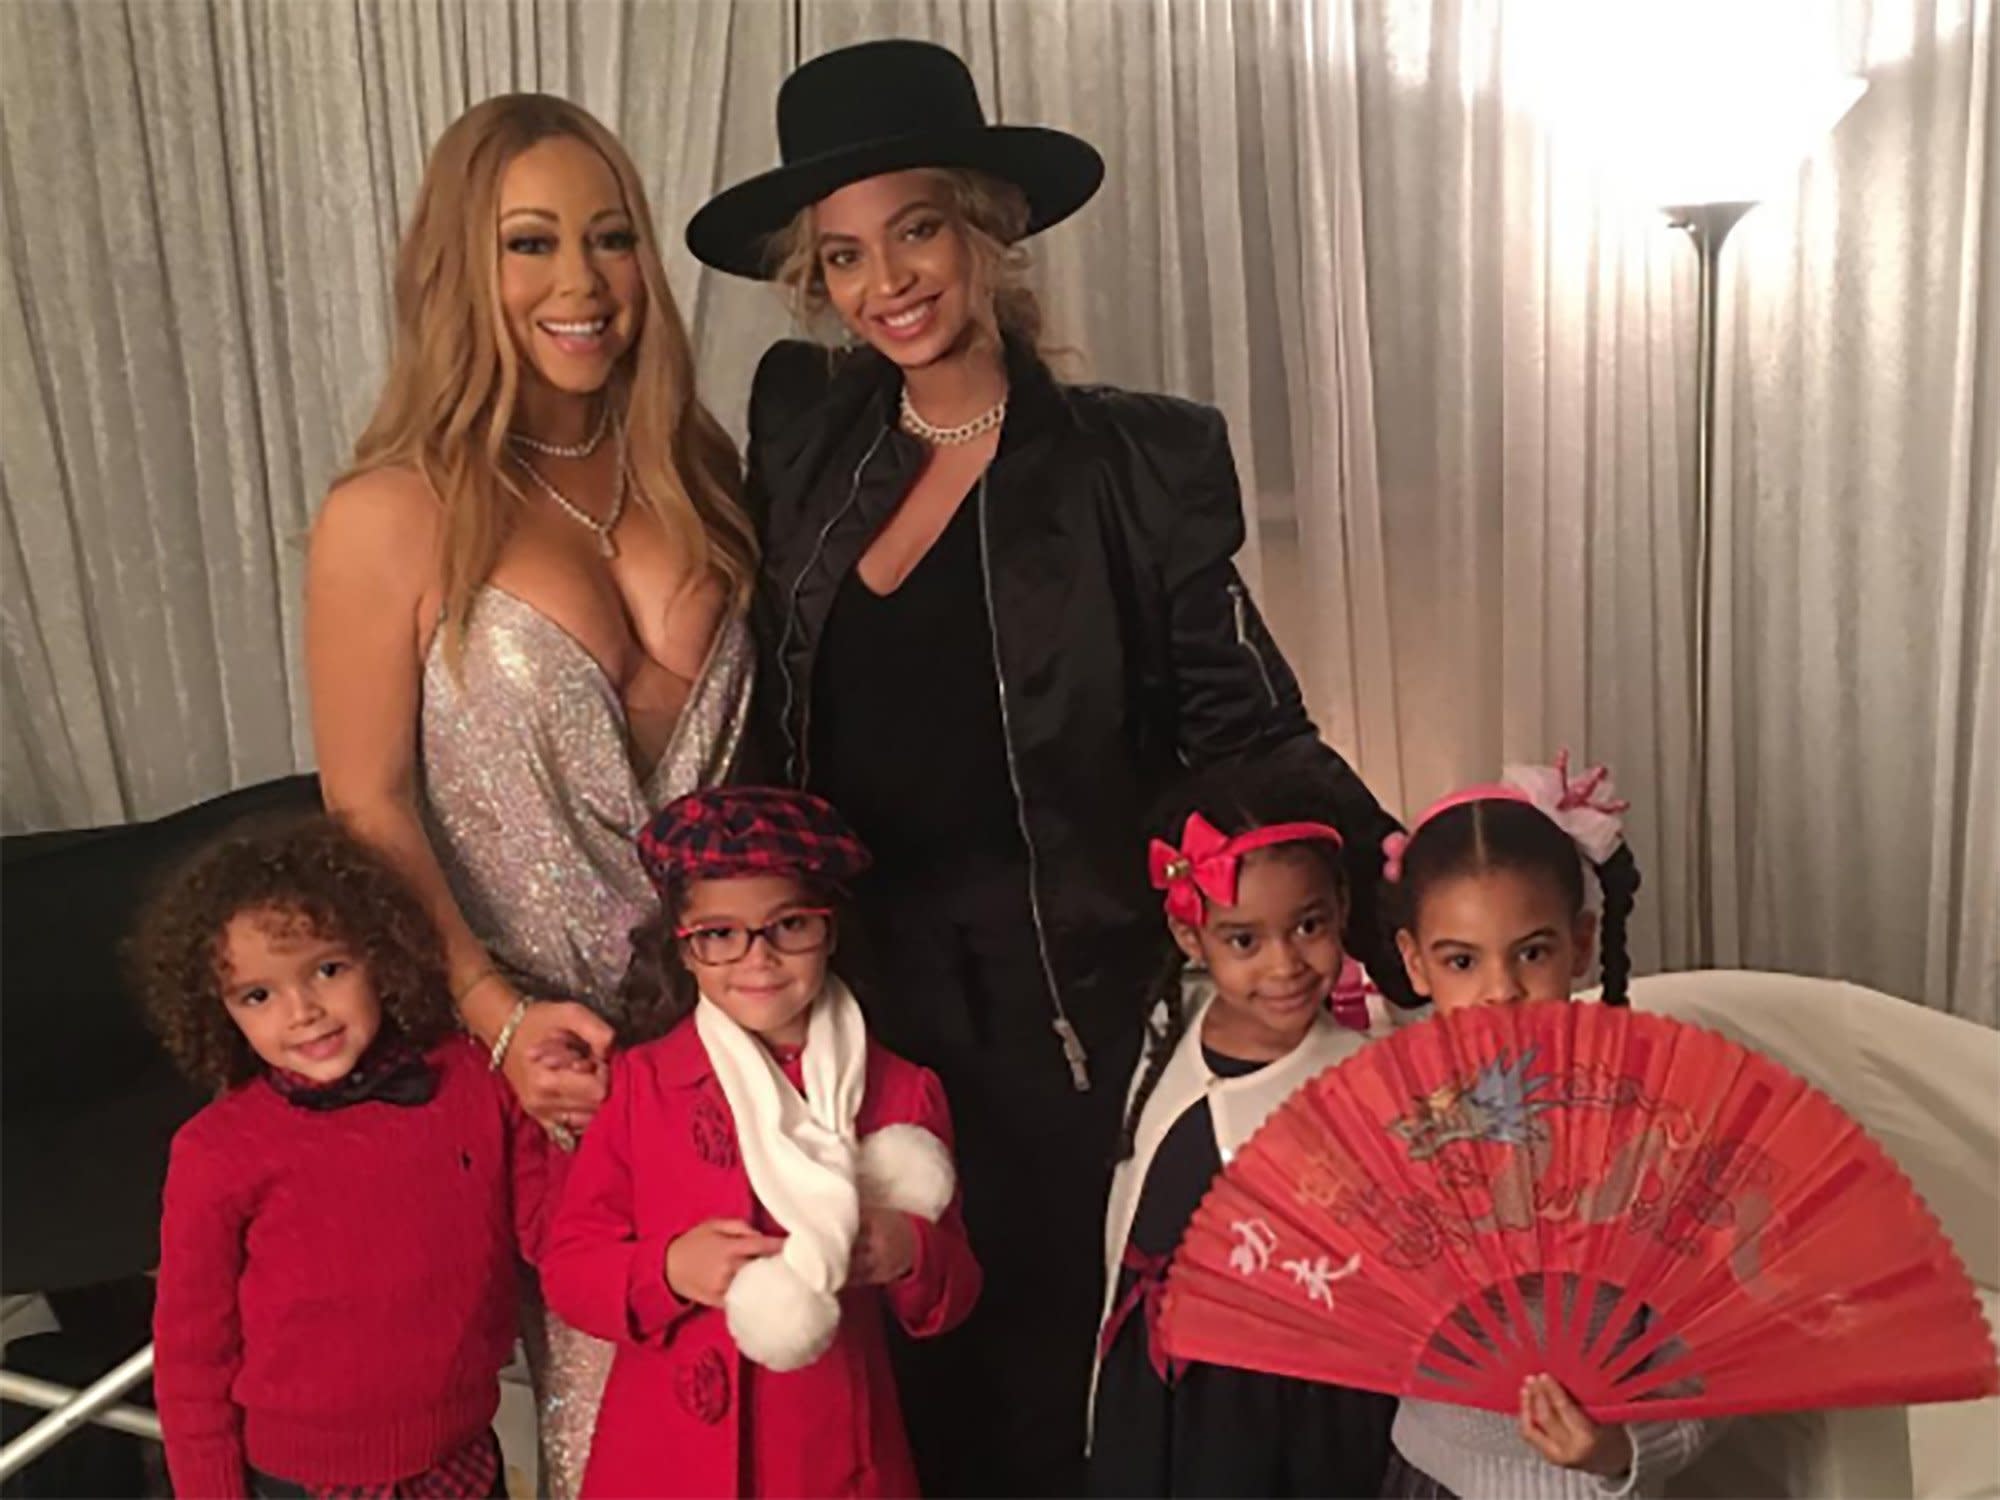 Beyoncé and Mariah Carey’s Family Photo With Their Kids Is All the